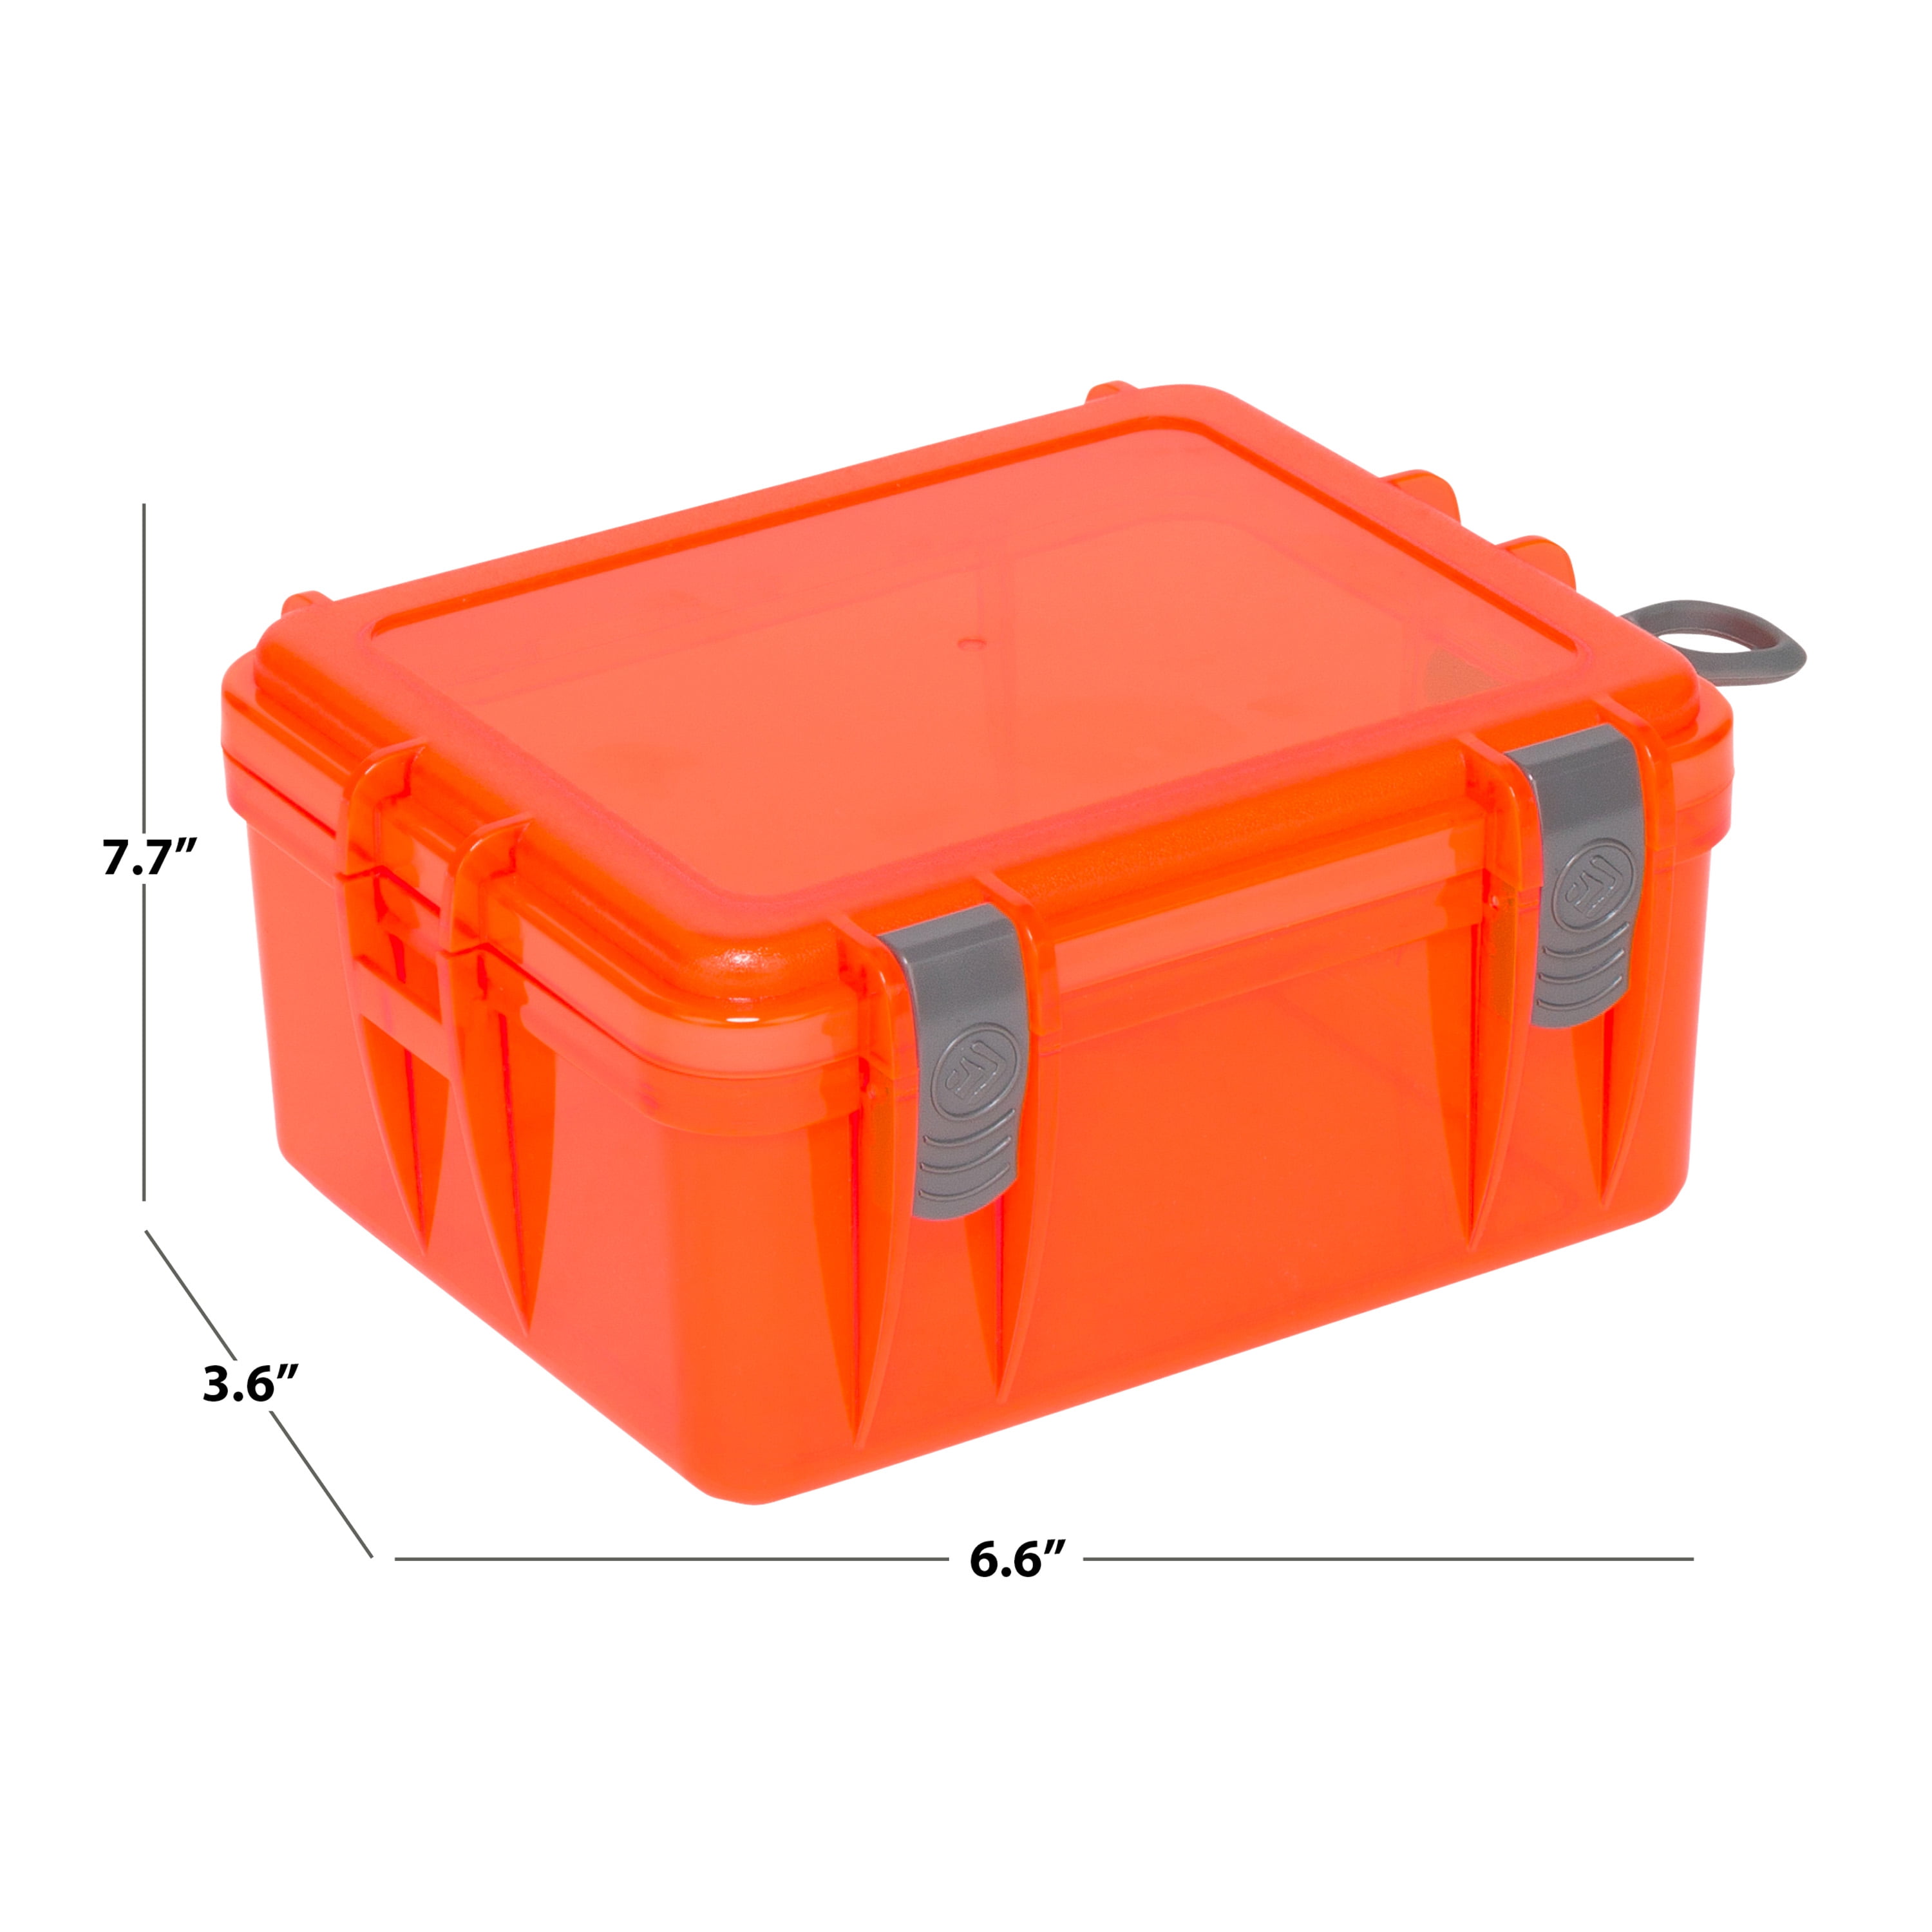 Outdoor Products Large Watertight Case Dry Box, Orange, 8 x 6.75